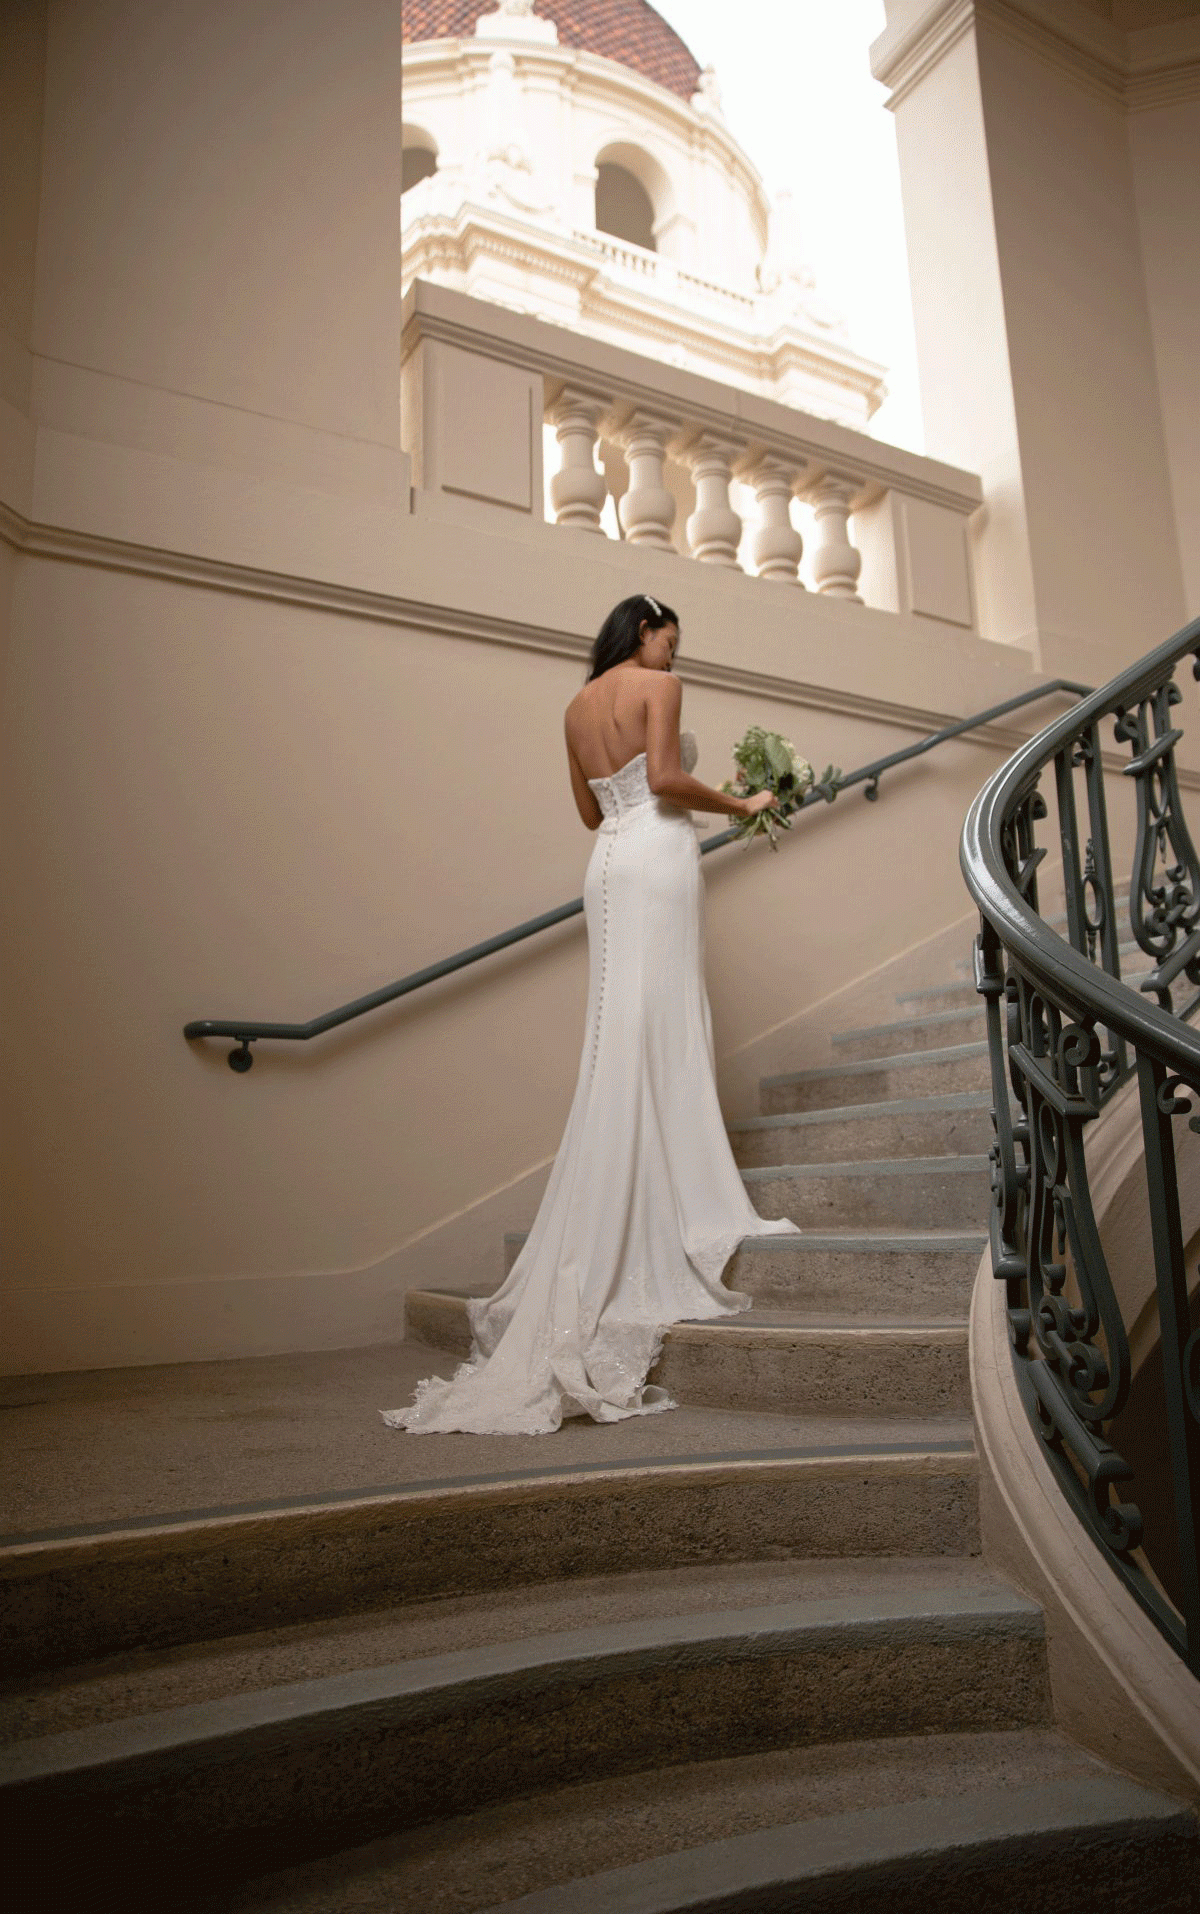 7597 - Pippa - Stella York 7597, Simple Crepe fitted Wedding Dress with Spaghetti straps - Modern & minimalist  Bridal Designs  by Stella York in store at Blessings Bridal Boutique - Loyal Parade, Mill Rise Westdene, Brighton. BN1 5GG T: 01273 505766 E: info@blessingsbridal.co.uk